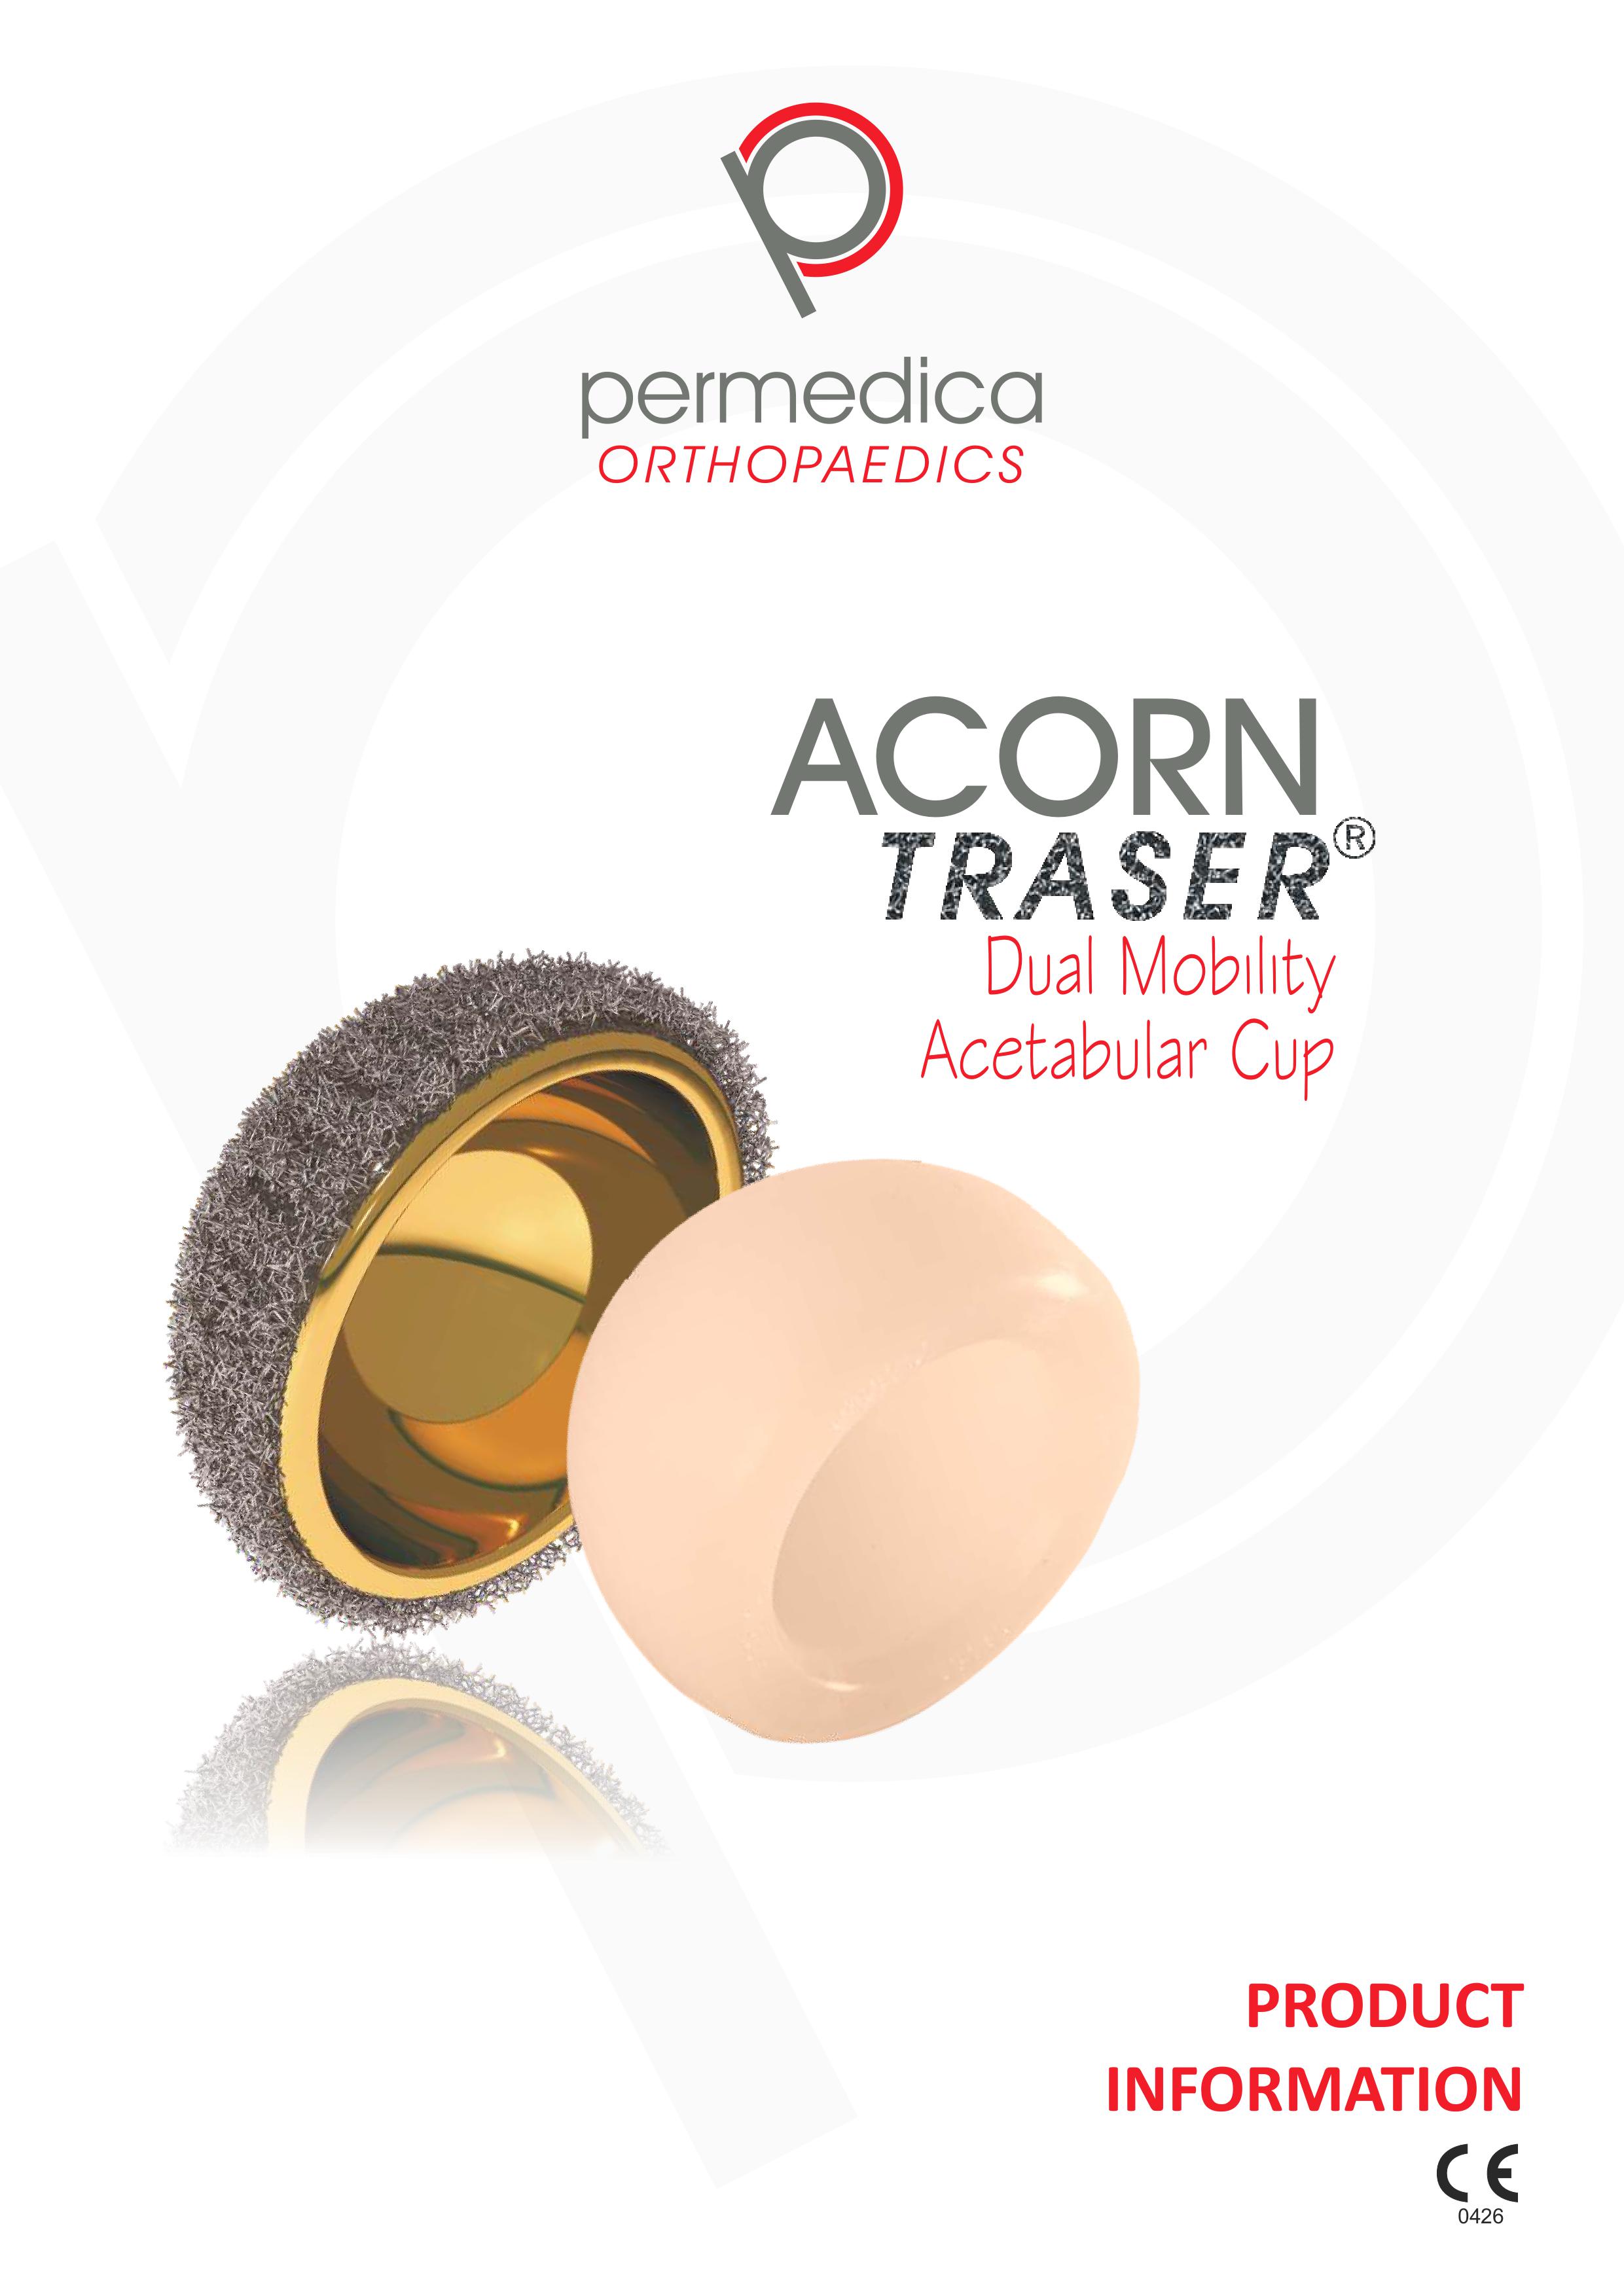 ACORN TRASER DUAL MOBILITY Acetabular Cup